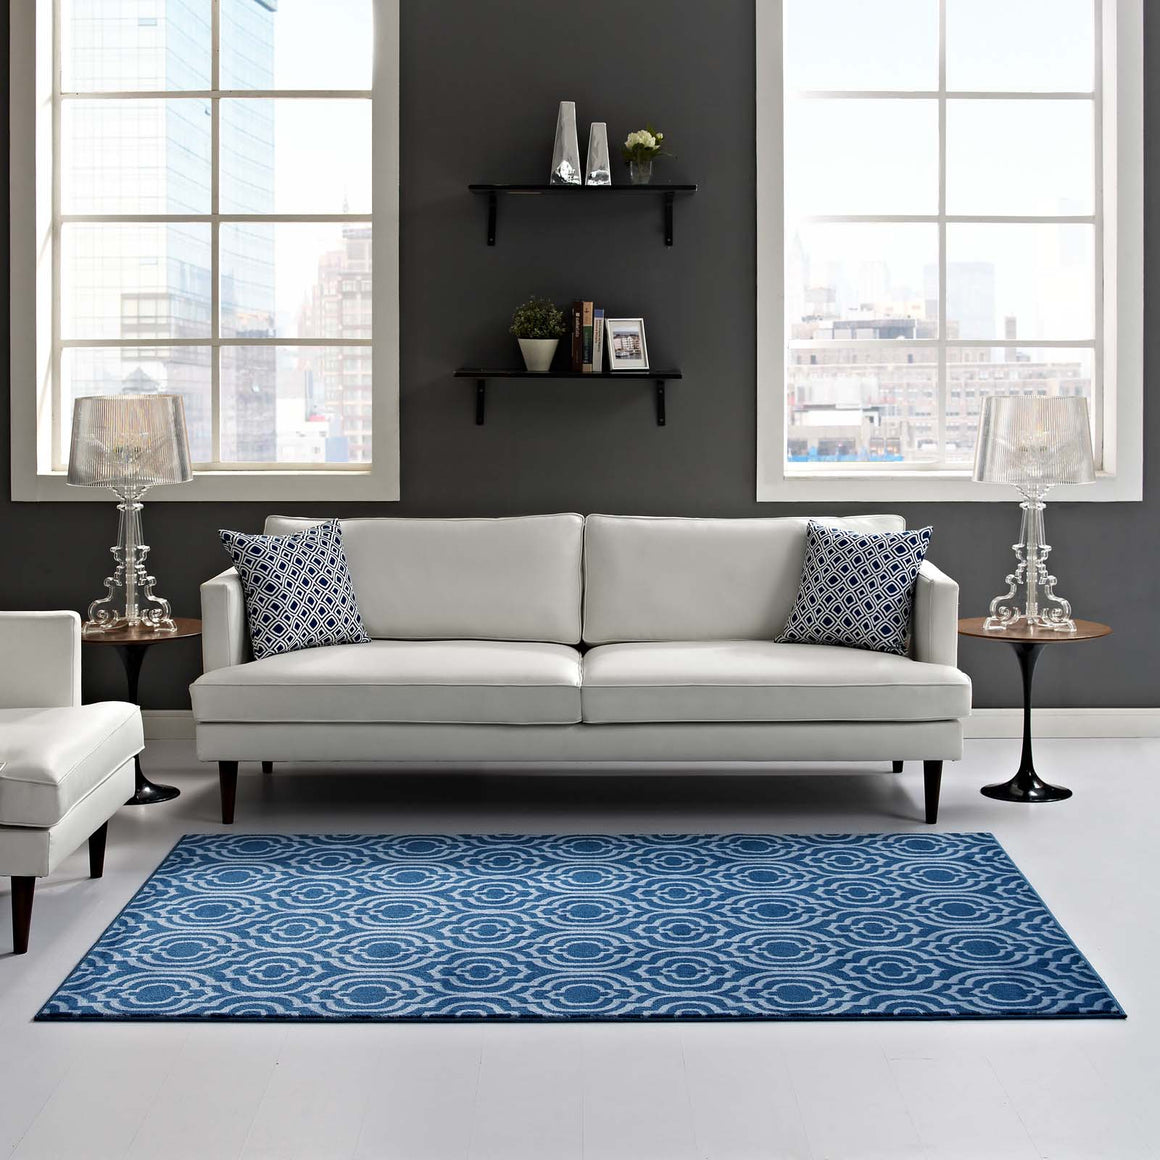 Frame Transitional Moroccan Trellis 8x10 Area Rug  Moroccan Blue and Light Blue